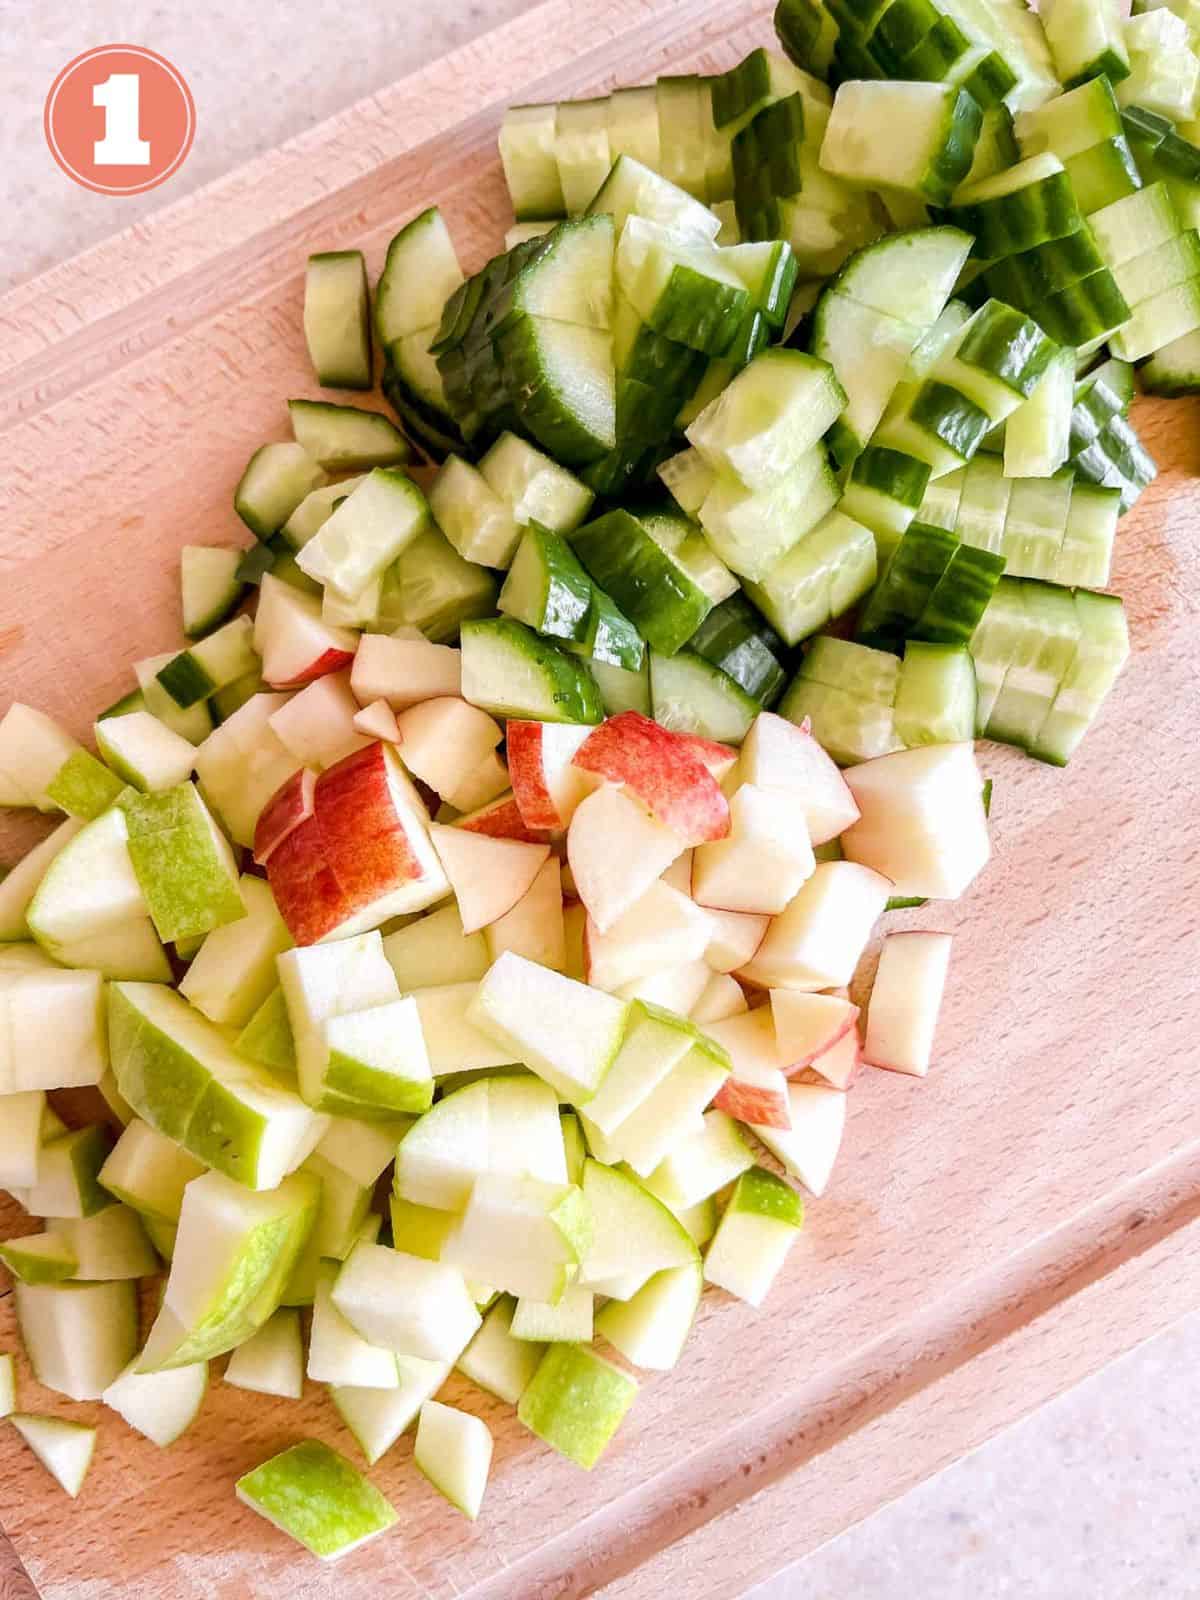 chopped cucumber, red apple and green apple on a chopping board labelled number one.